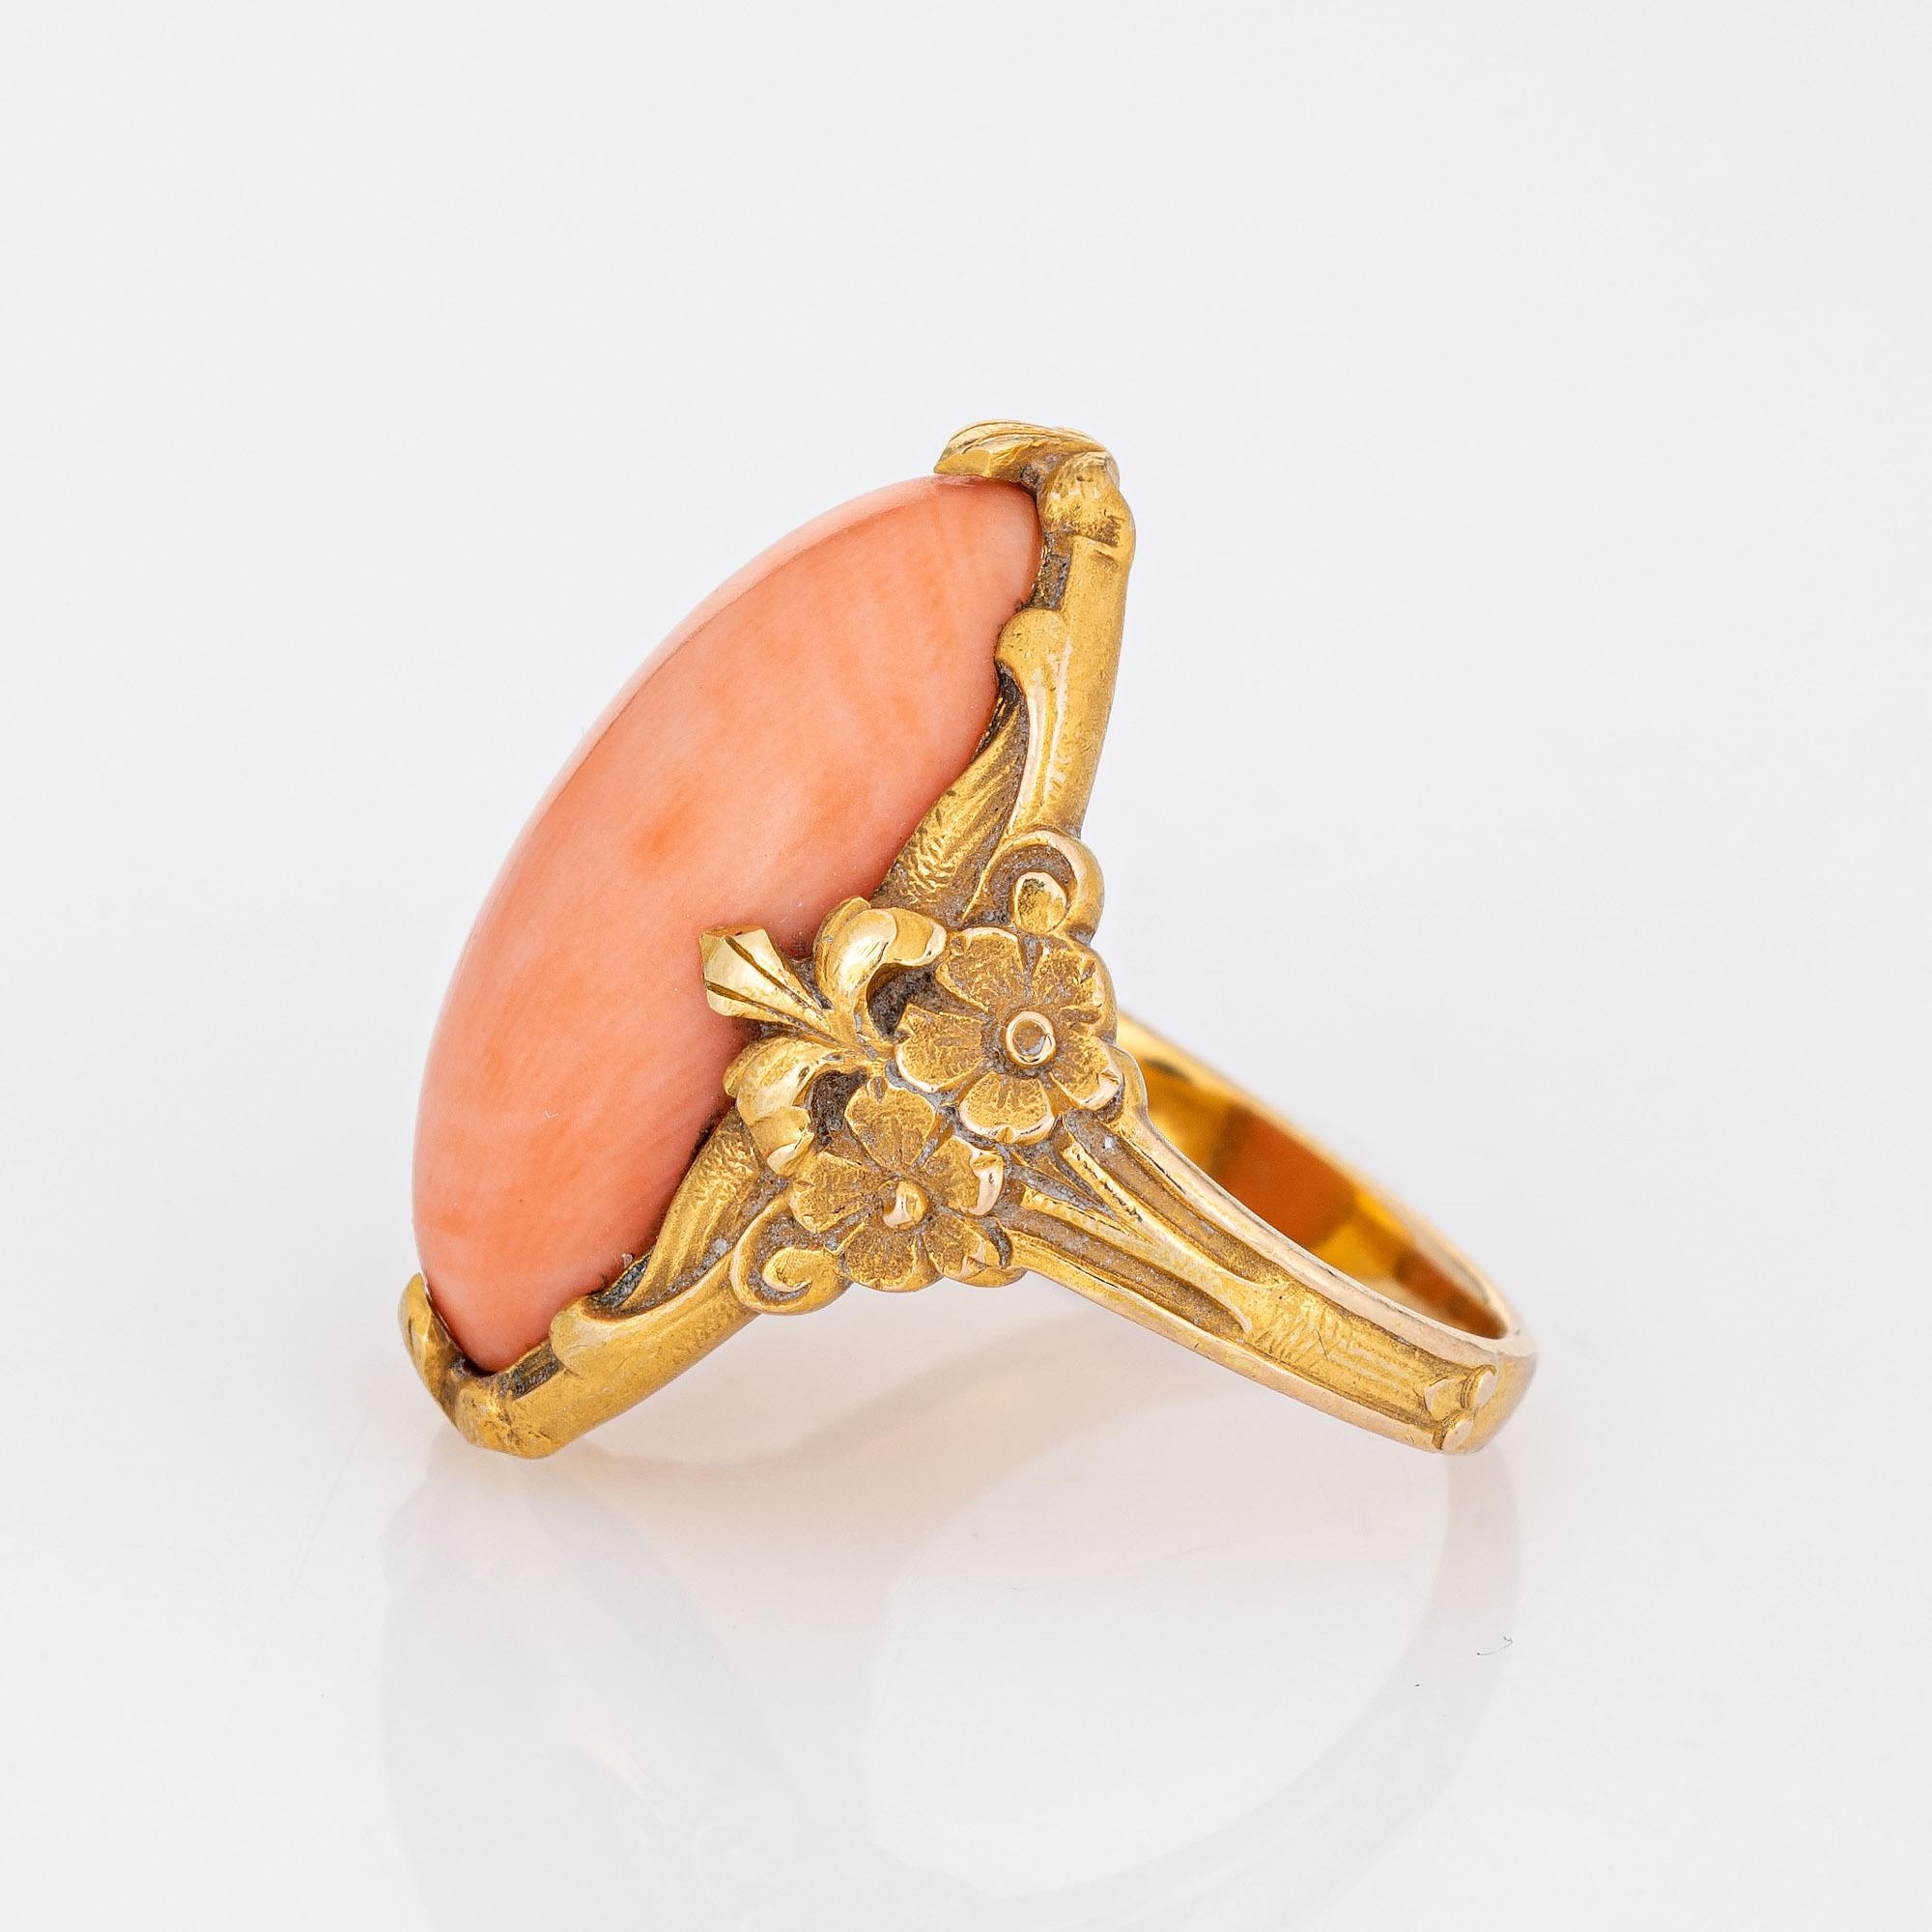 Cabochon Antique Art Nouveau Coral Ring Vintage 14k Yellow Gold Oval Flowers Fine Jewelry